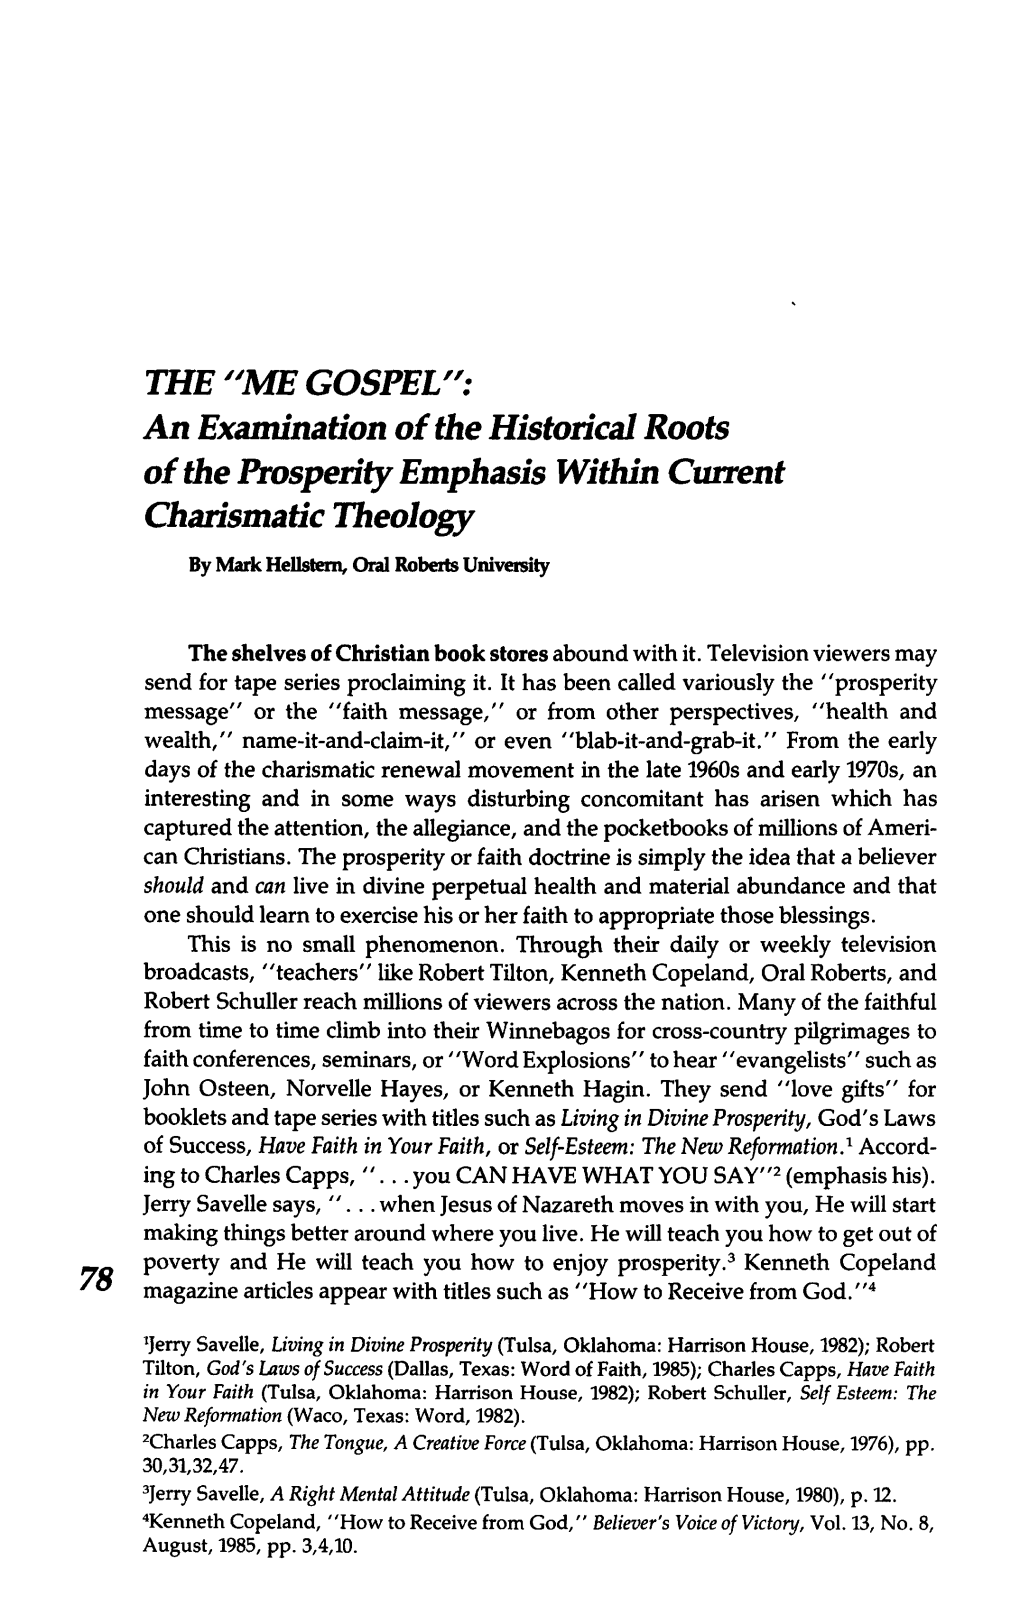 ME GOSPEL": an Examination of the Historical Roots of the Prosperity Emphasis Within Current Charismatic Theology by Mark Hellstern, Oral Roberts University